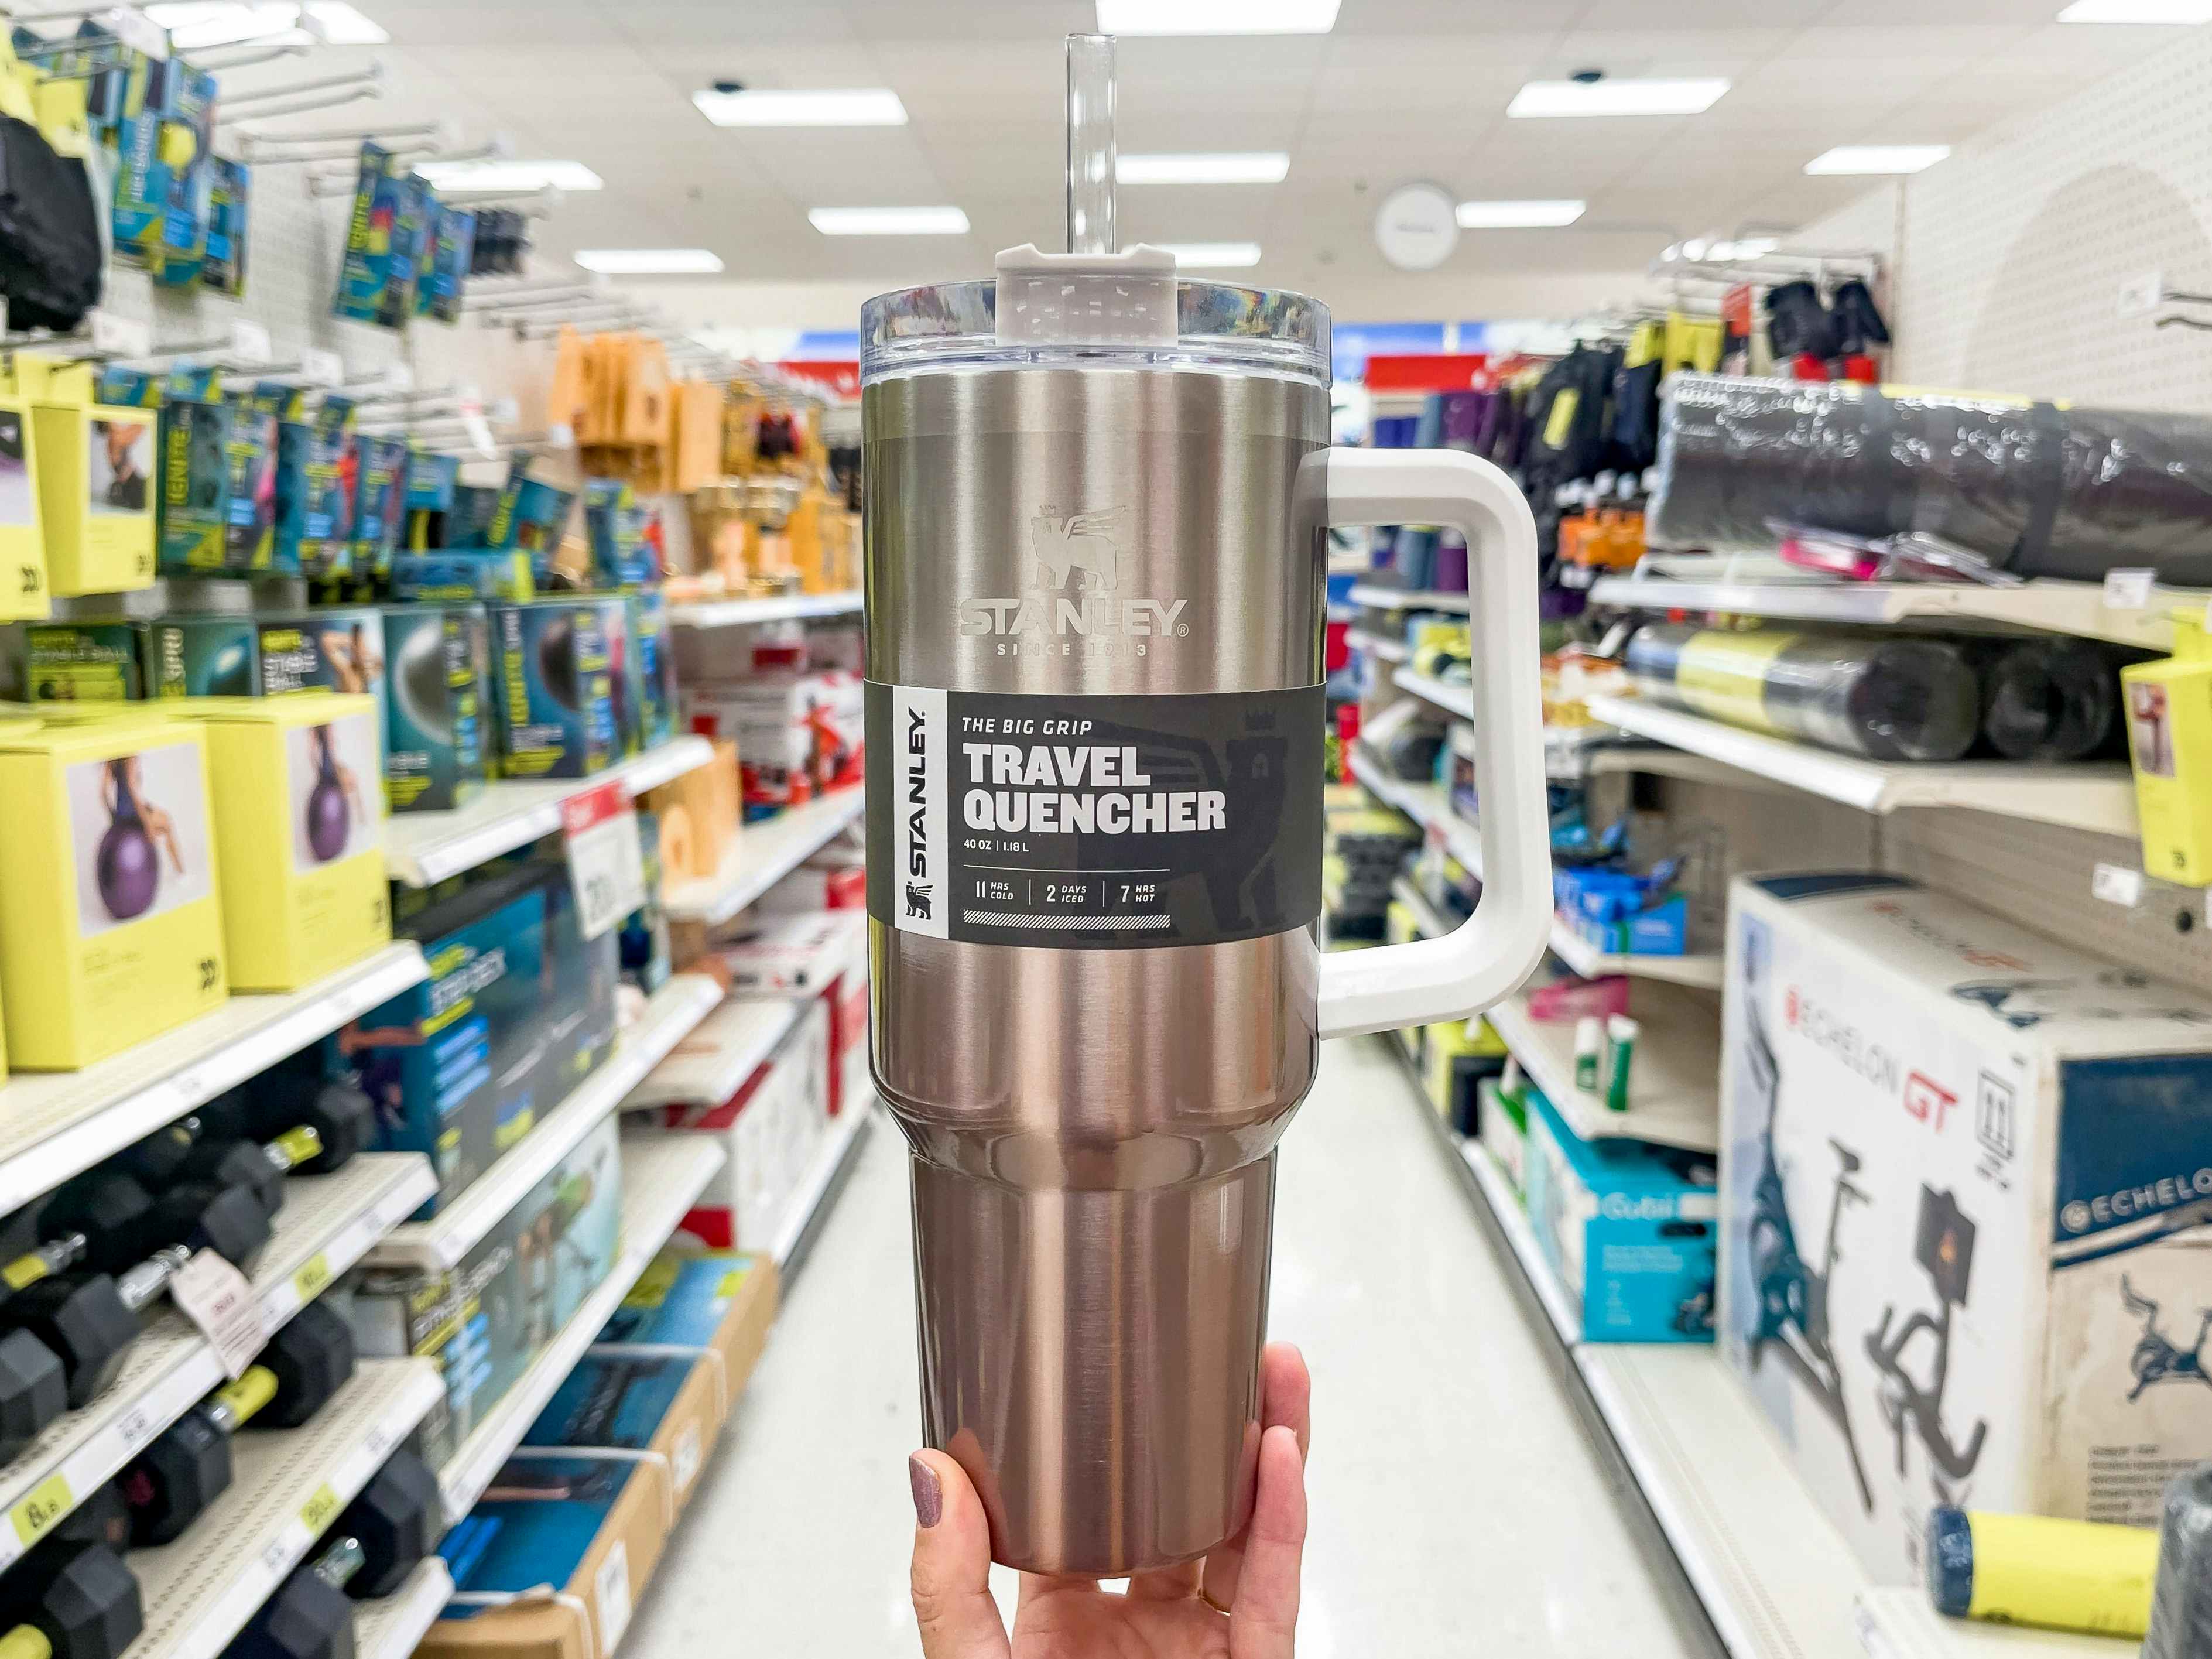 https://prod-cdn-thekrazycouponlady.imgix.net/wp-content/uploads/2022/07/target-exclusive-stanley-adventure-travel-quencher-tumbler-available-now-restock-1672156045-1672156045.jpg?auto=format&fit=fill&q=25